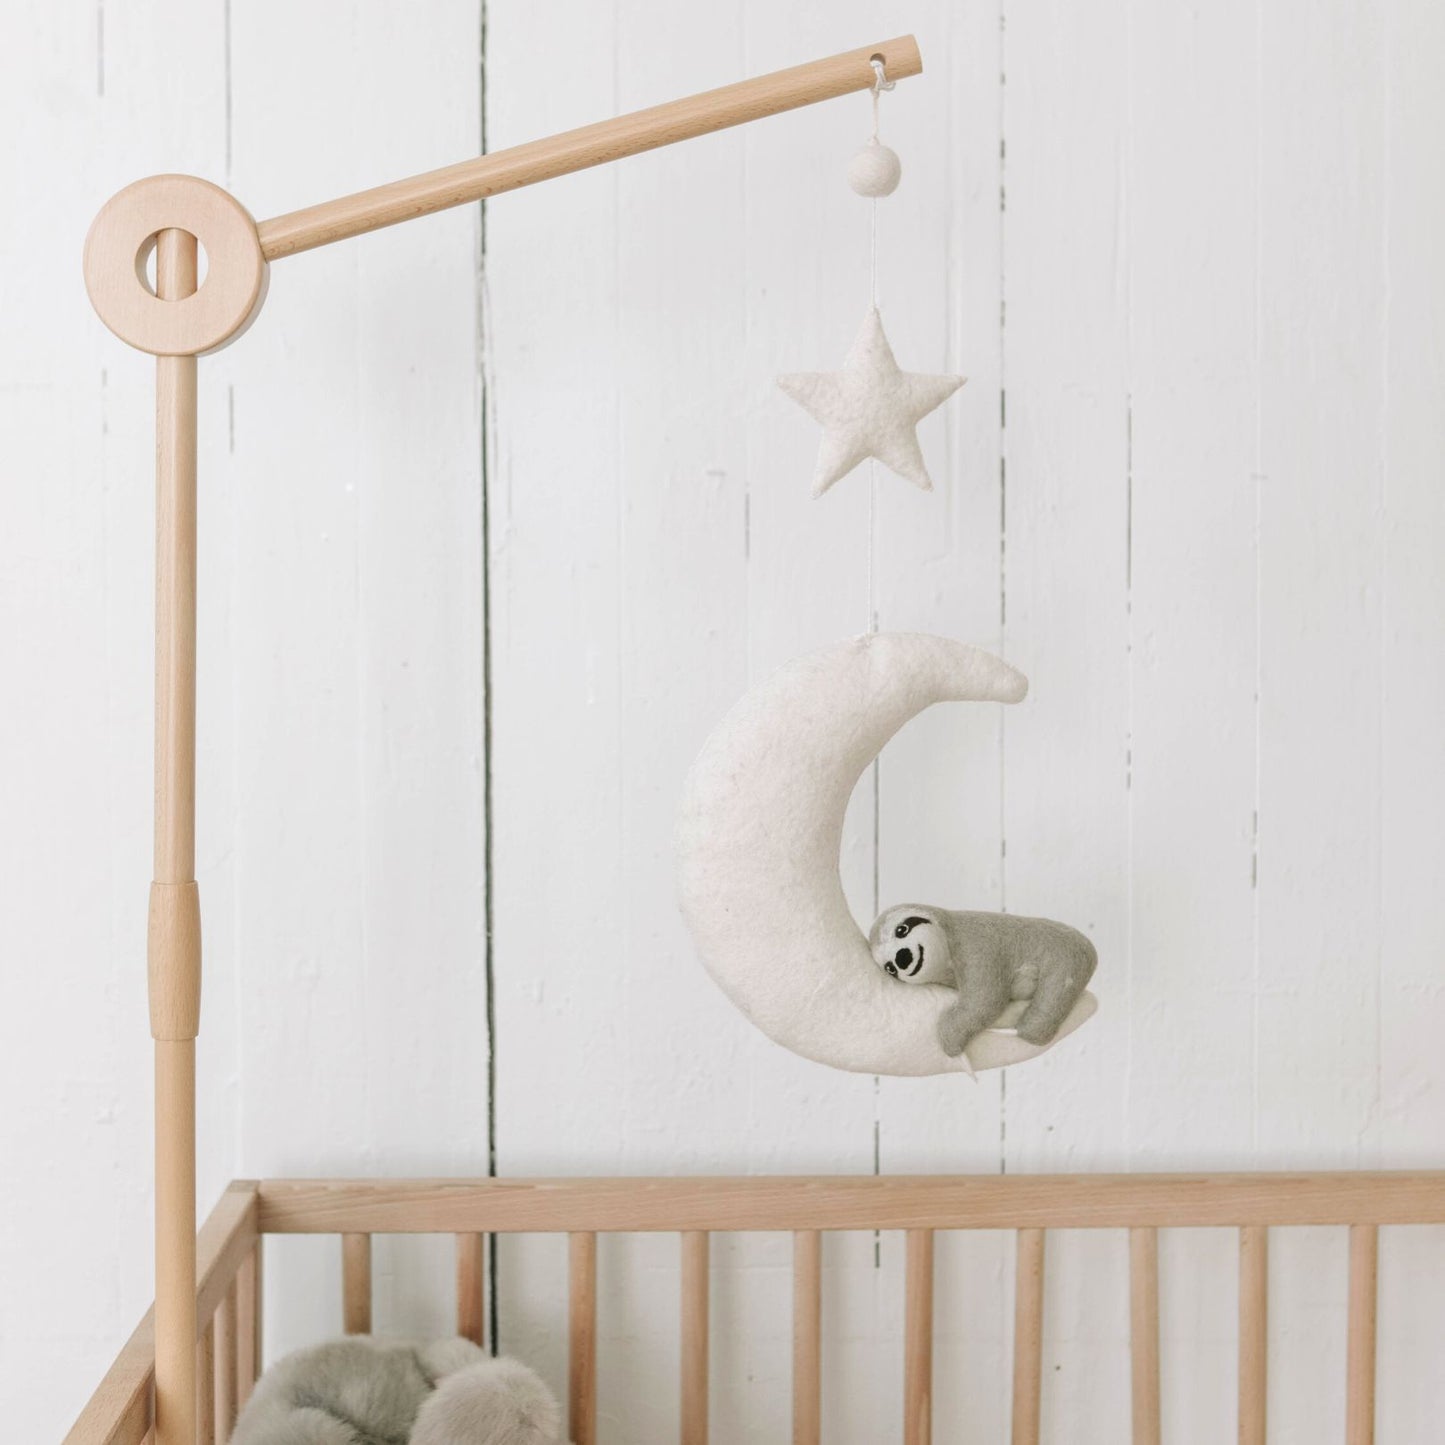 Crib Arm for Baby Mobile